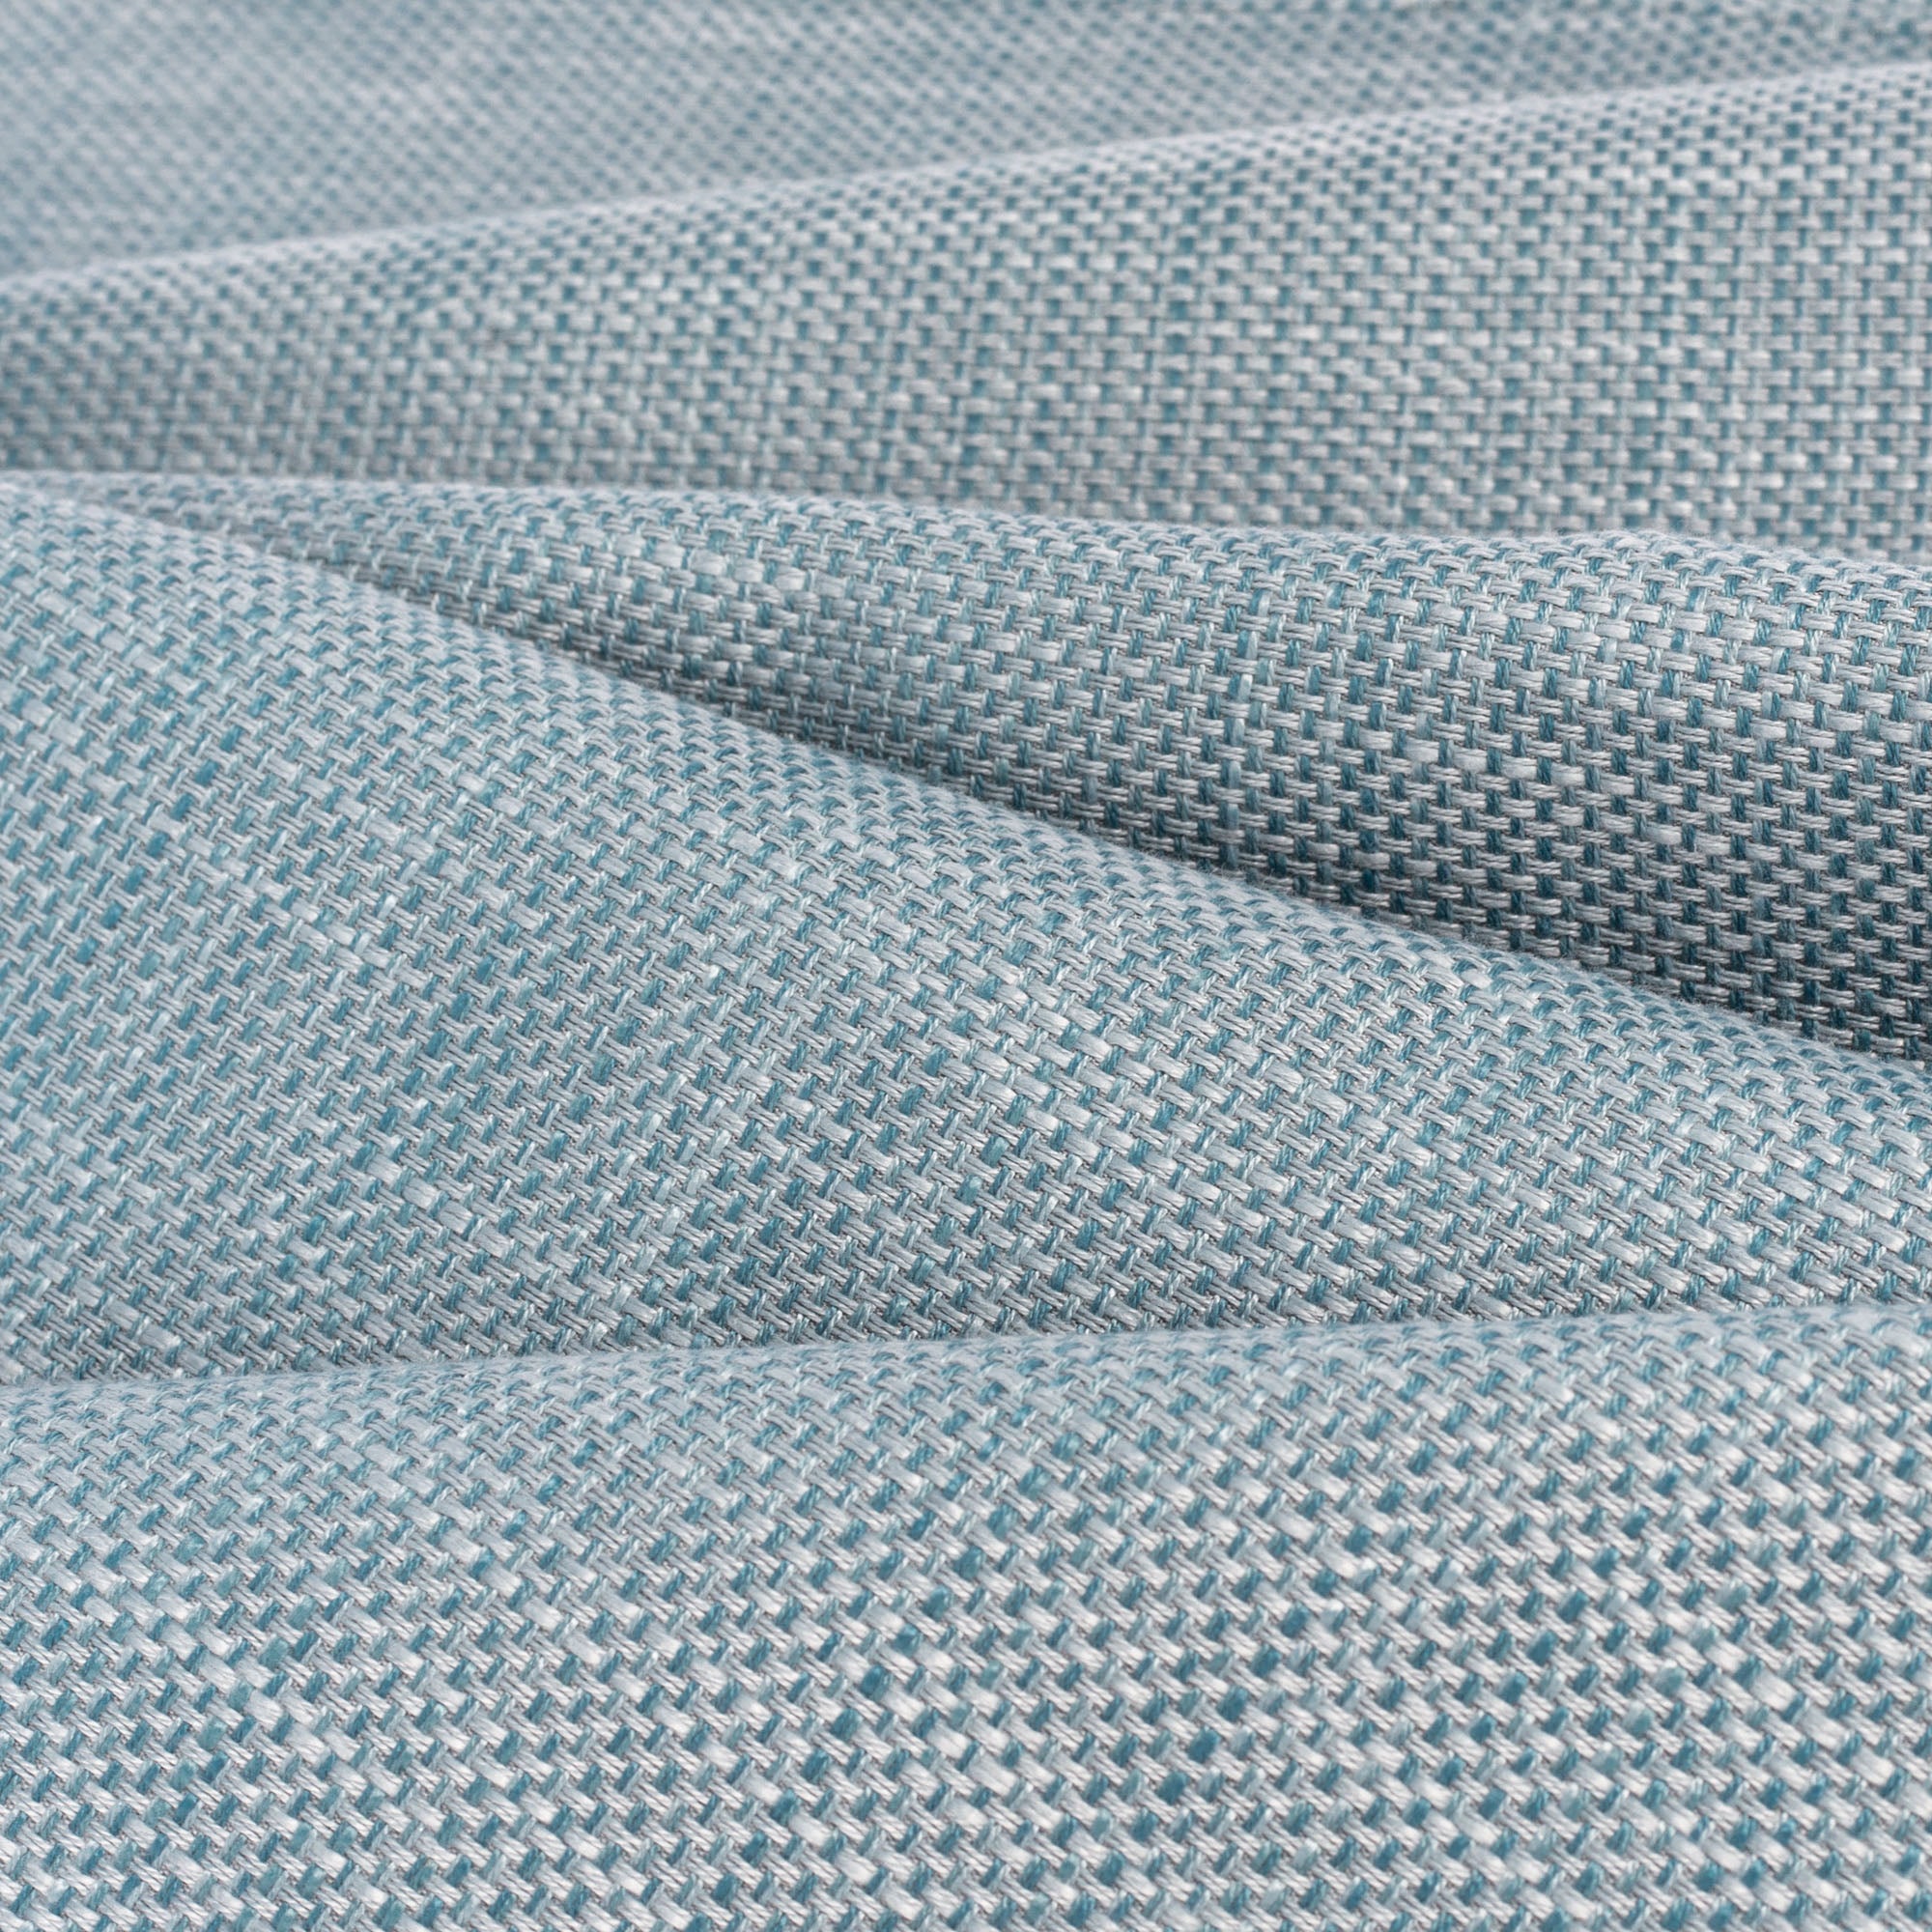 Ernesto Riviera, a gray blue basketweave indoor outdoor fabric from Tonic Living